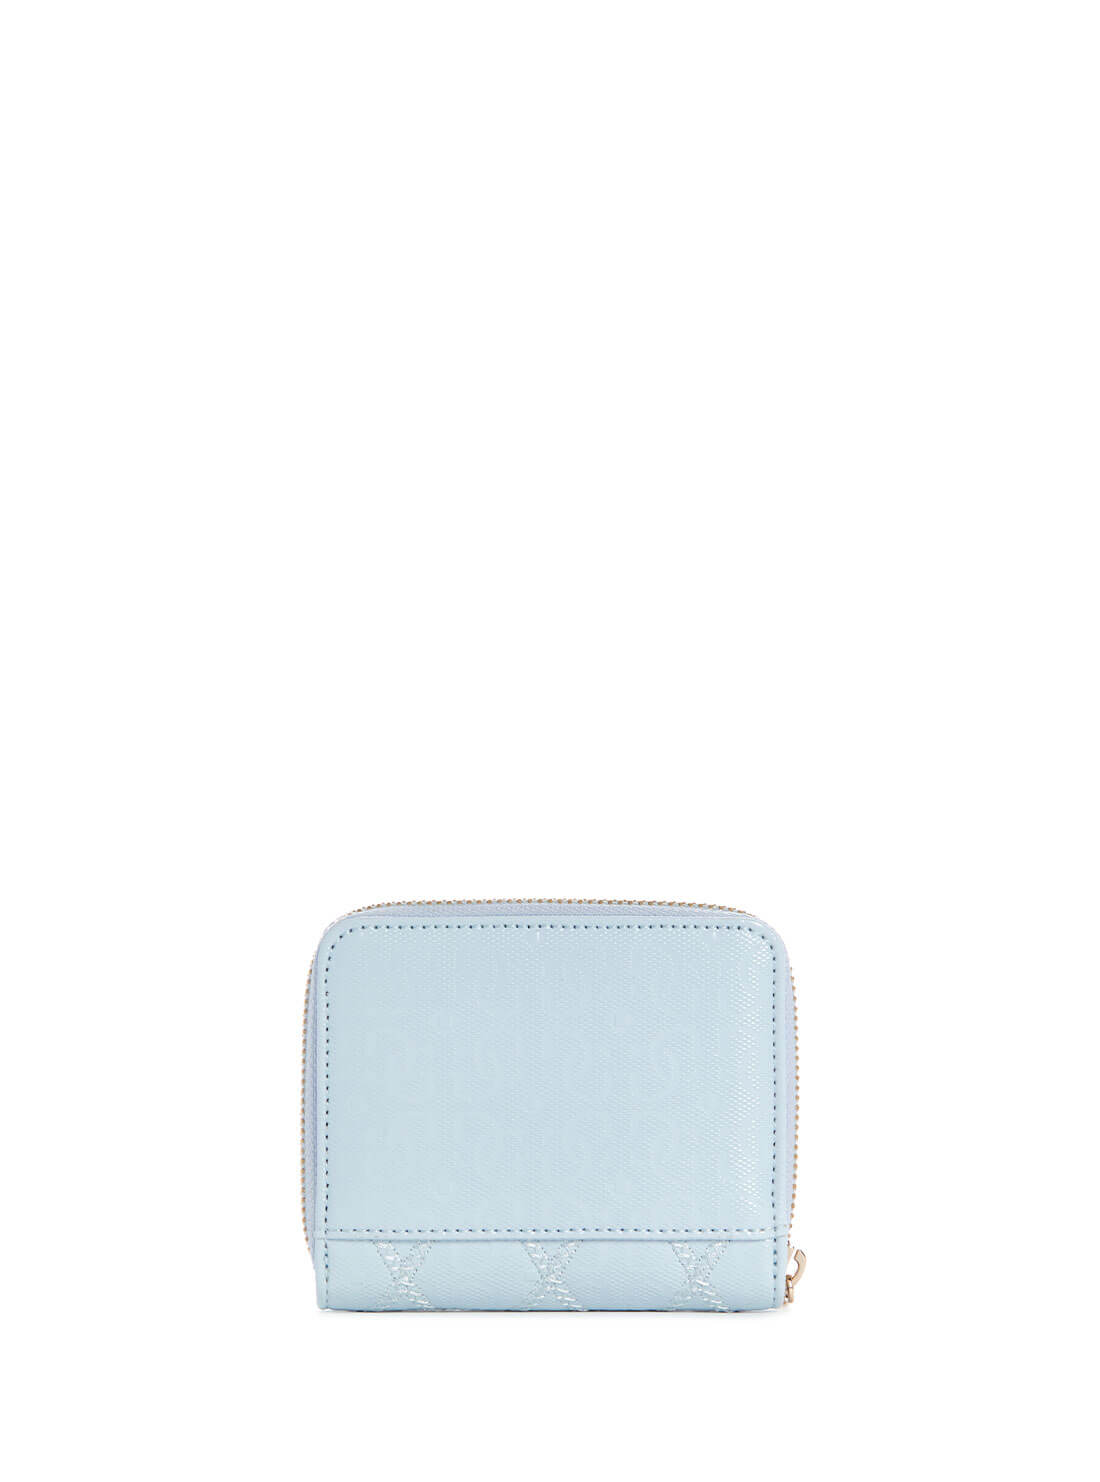 GUESS Sky Blue Adi Small Wallet back view